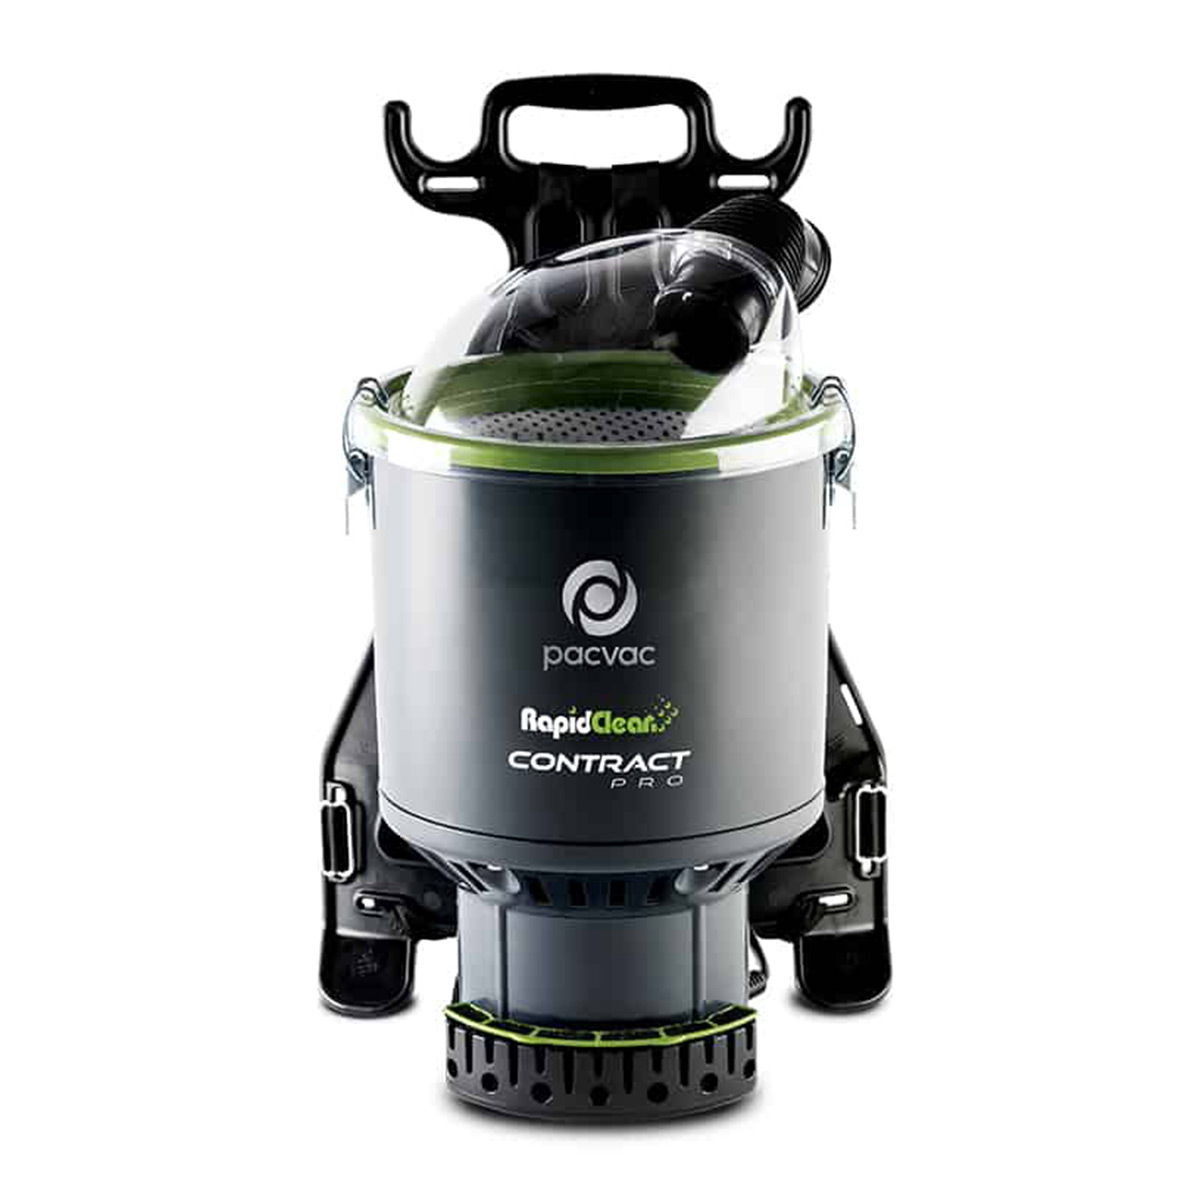 machinery-matting-vacuums-rapidclean-pacvac-contract-pro-vacuum-cleaner-heavy-duty-high-powered-ergonomic-lightweight-design-vjs-distributors-hawkes-bay-nz-R650